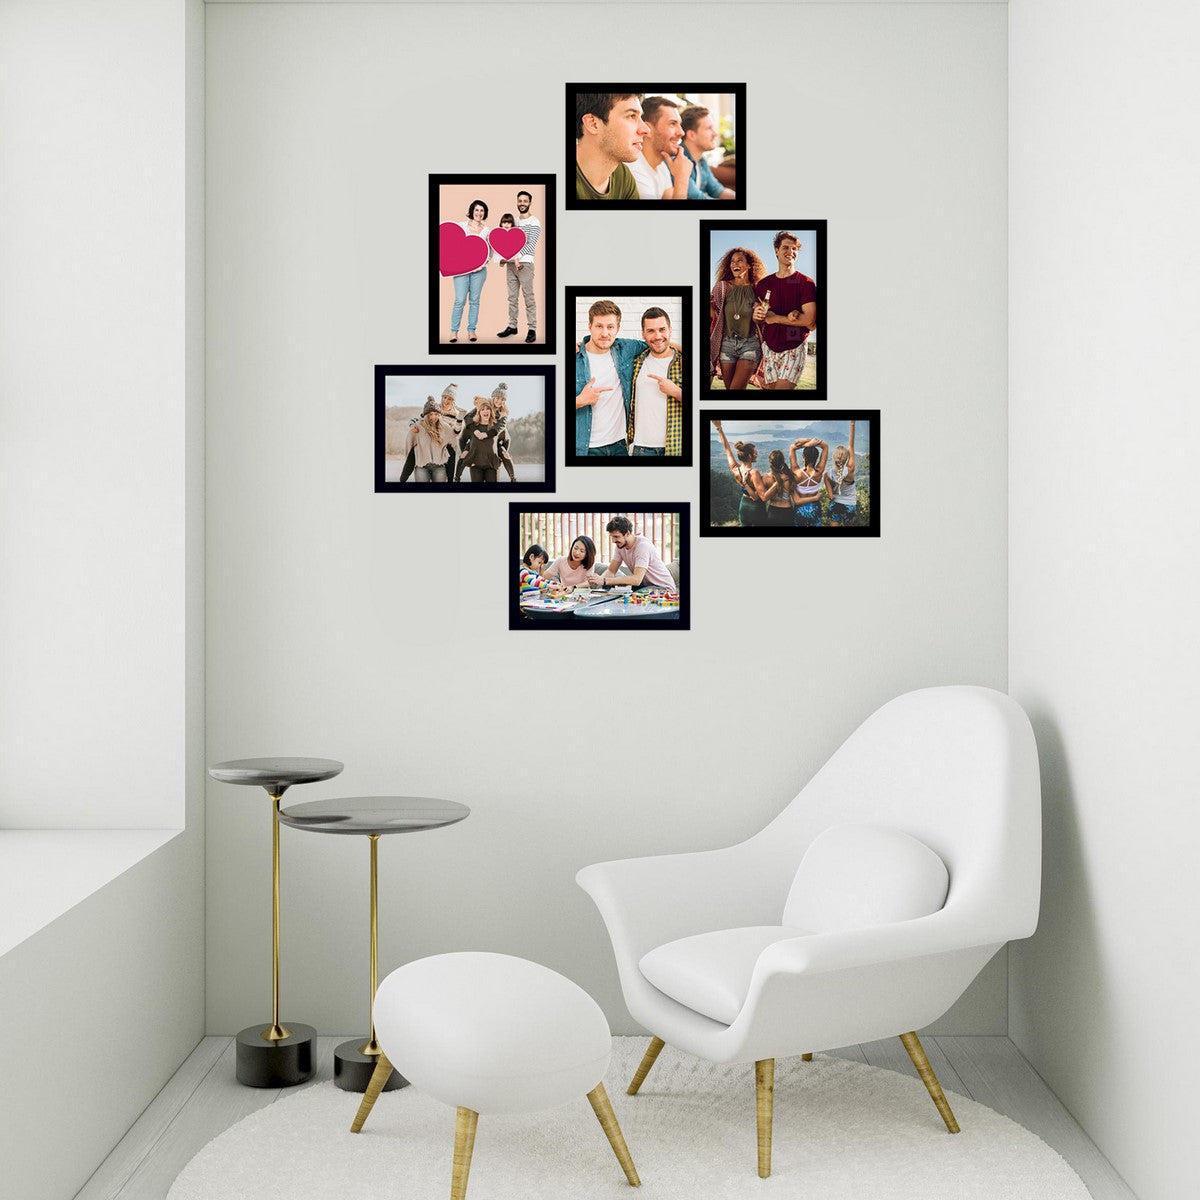 Memory Wall Collage Photo Frame - Set of 7 Photo Frames for 7 Photos of 5"x7" 2